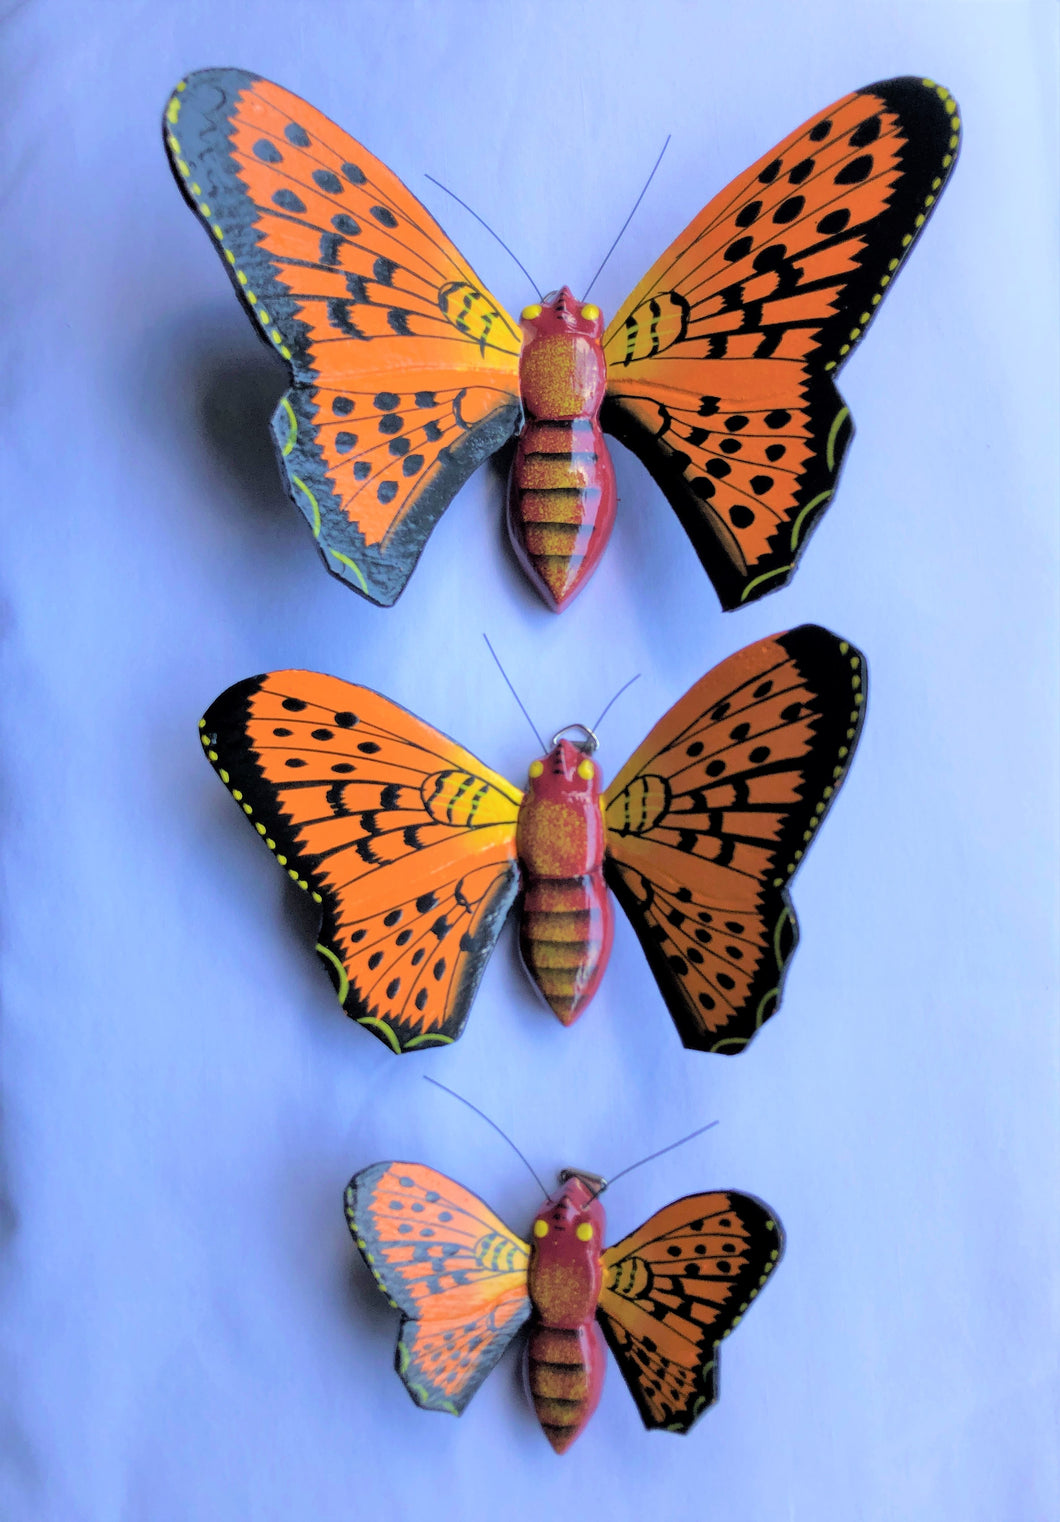 butterfly - SET OF 3 - for wall - orange - wood/handpainted